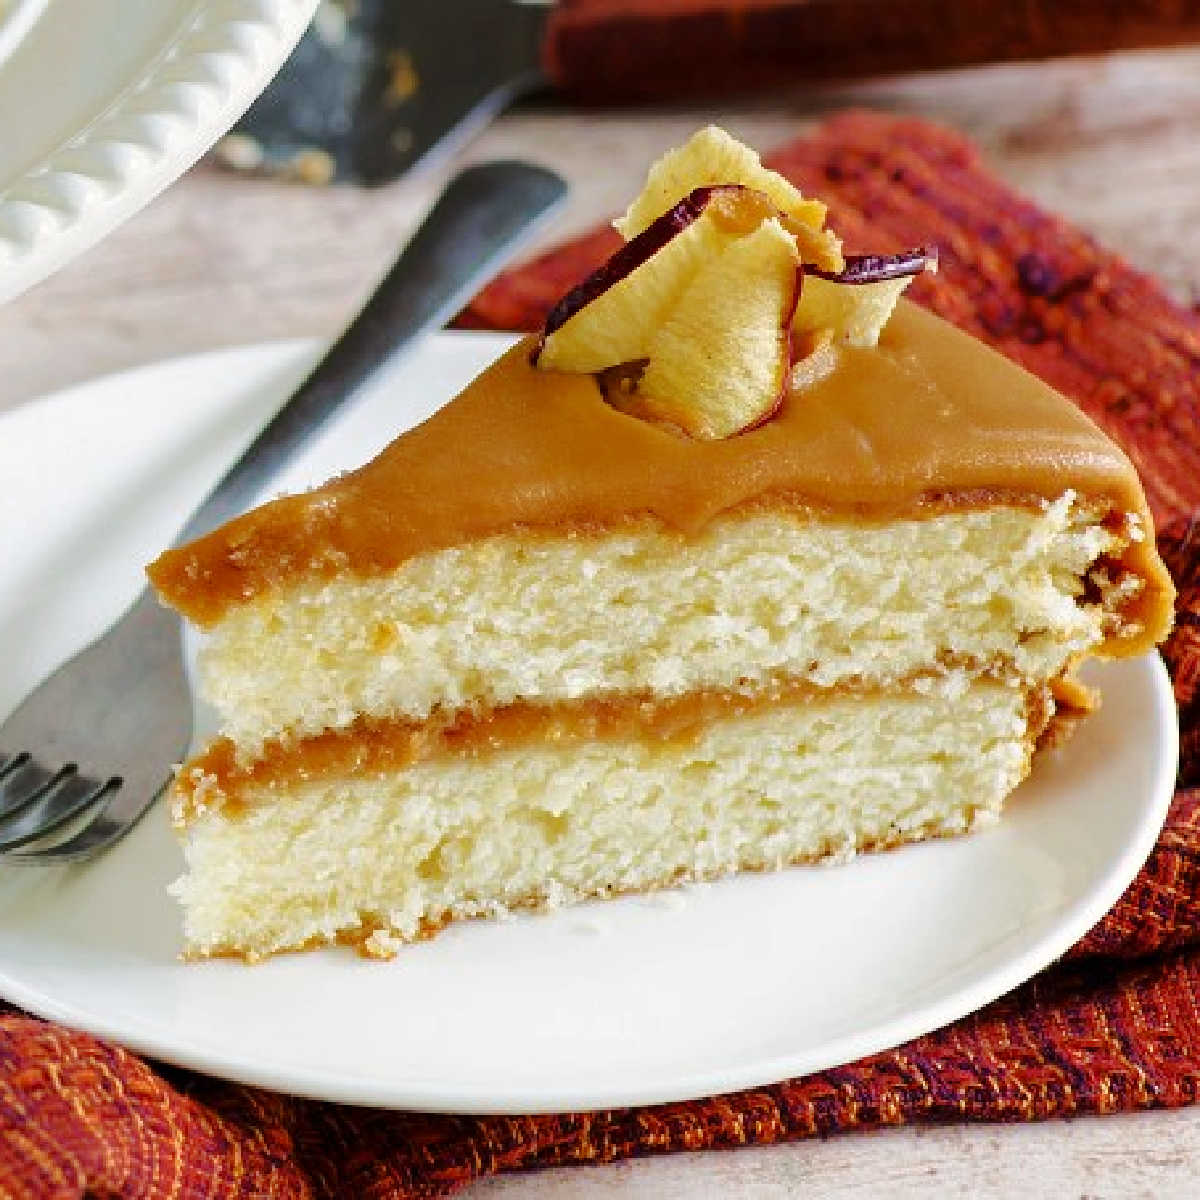 Slice of homemade buttery vanilla cake with homemade caramel frosting topped with apple chips.